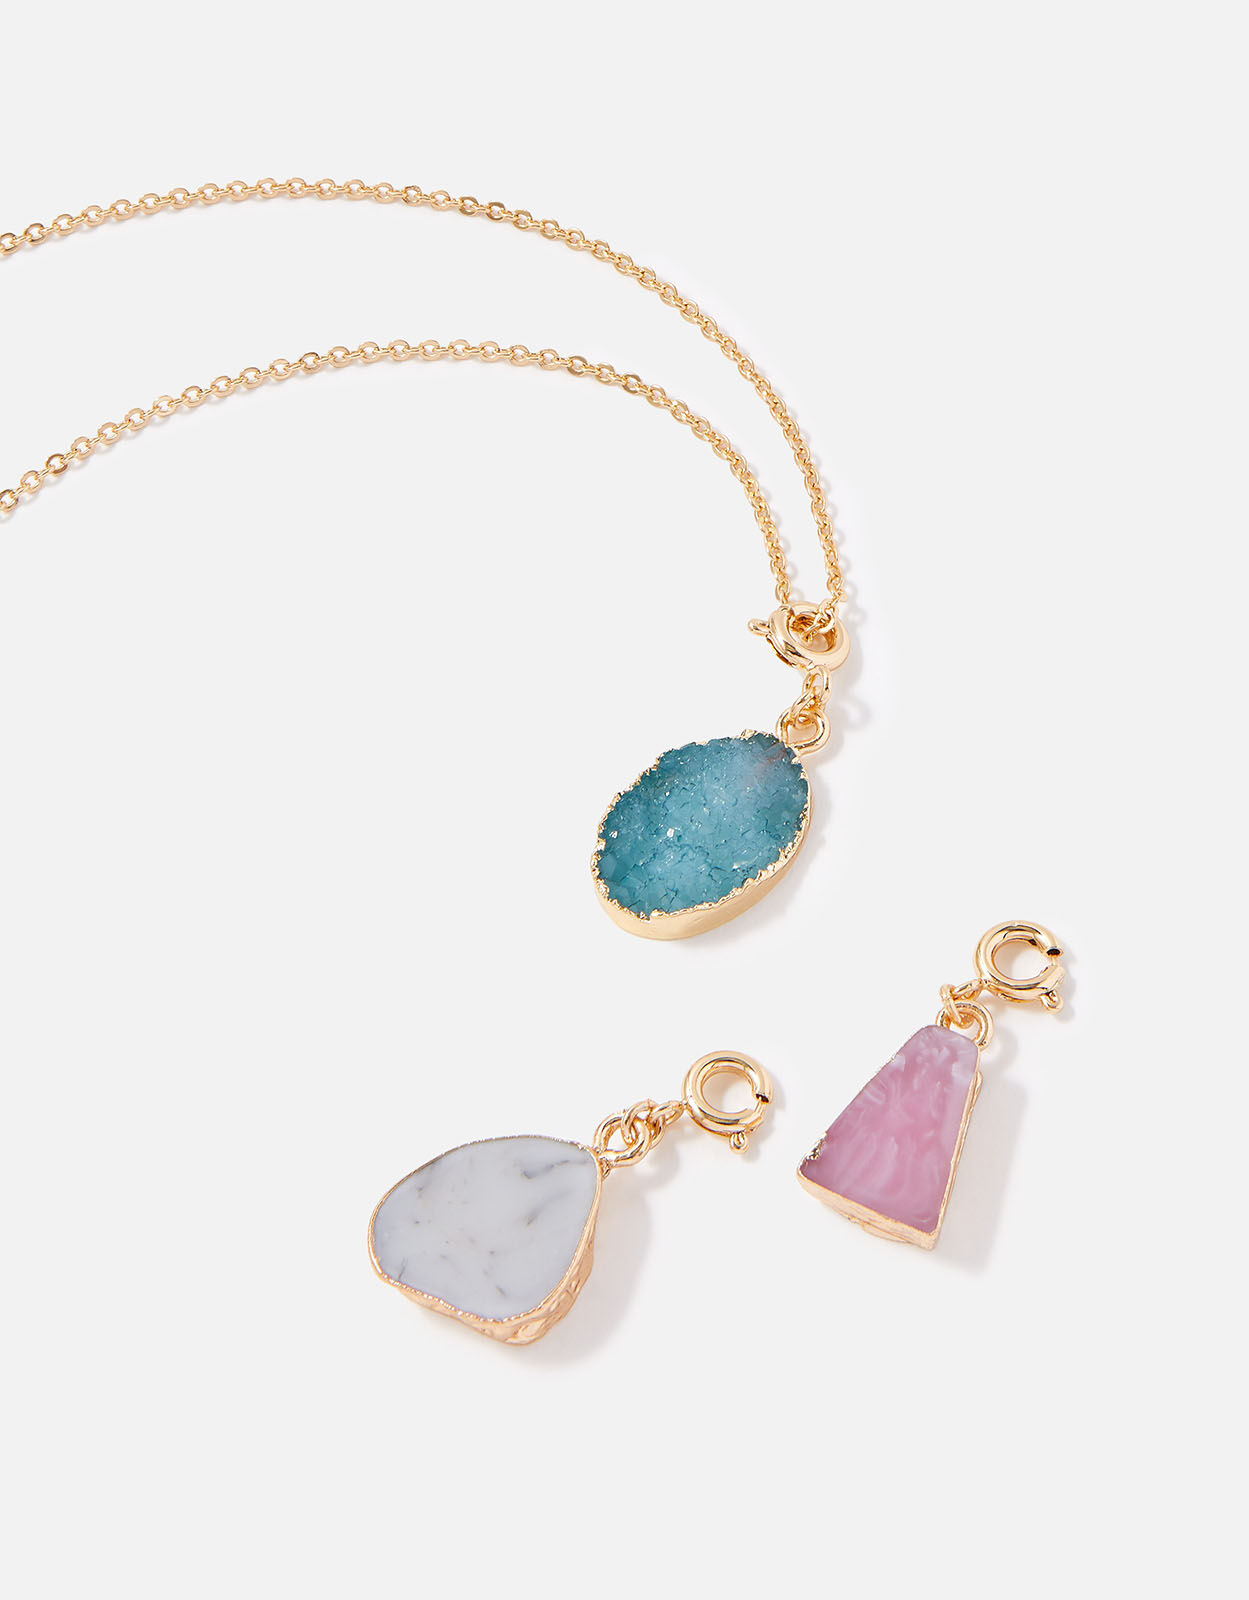 Interchangeable Crystal Necklace Workshop - 2/17 - The 443 Social Club &  Lounge